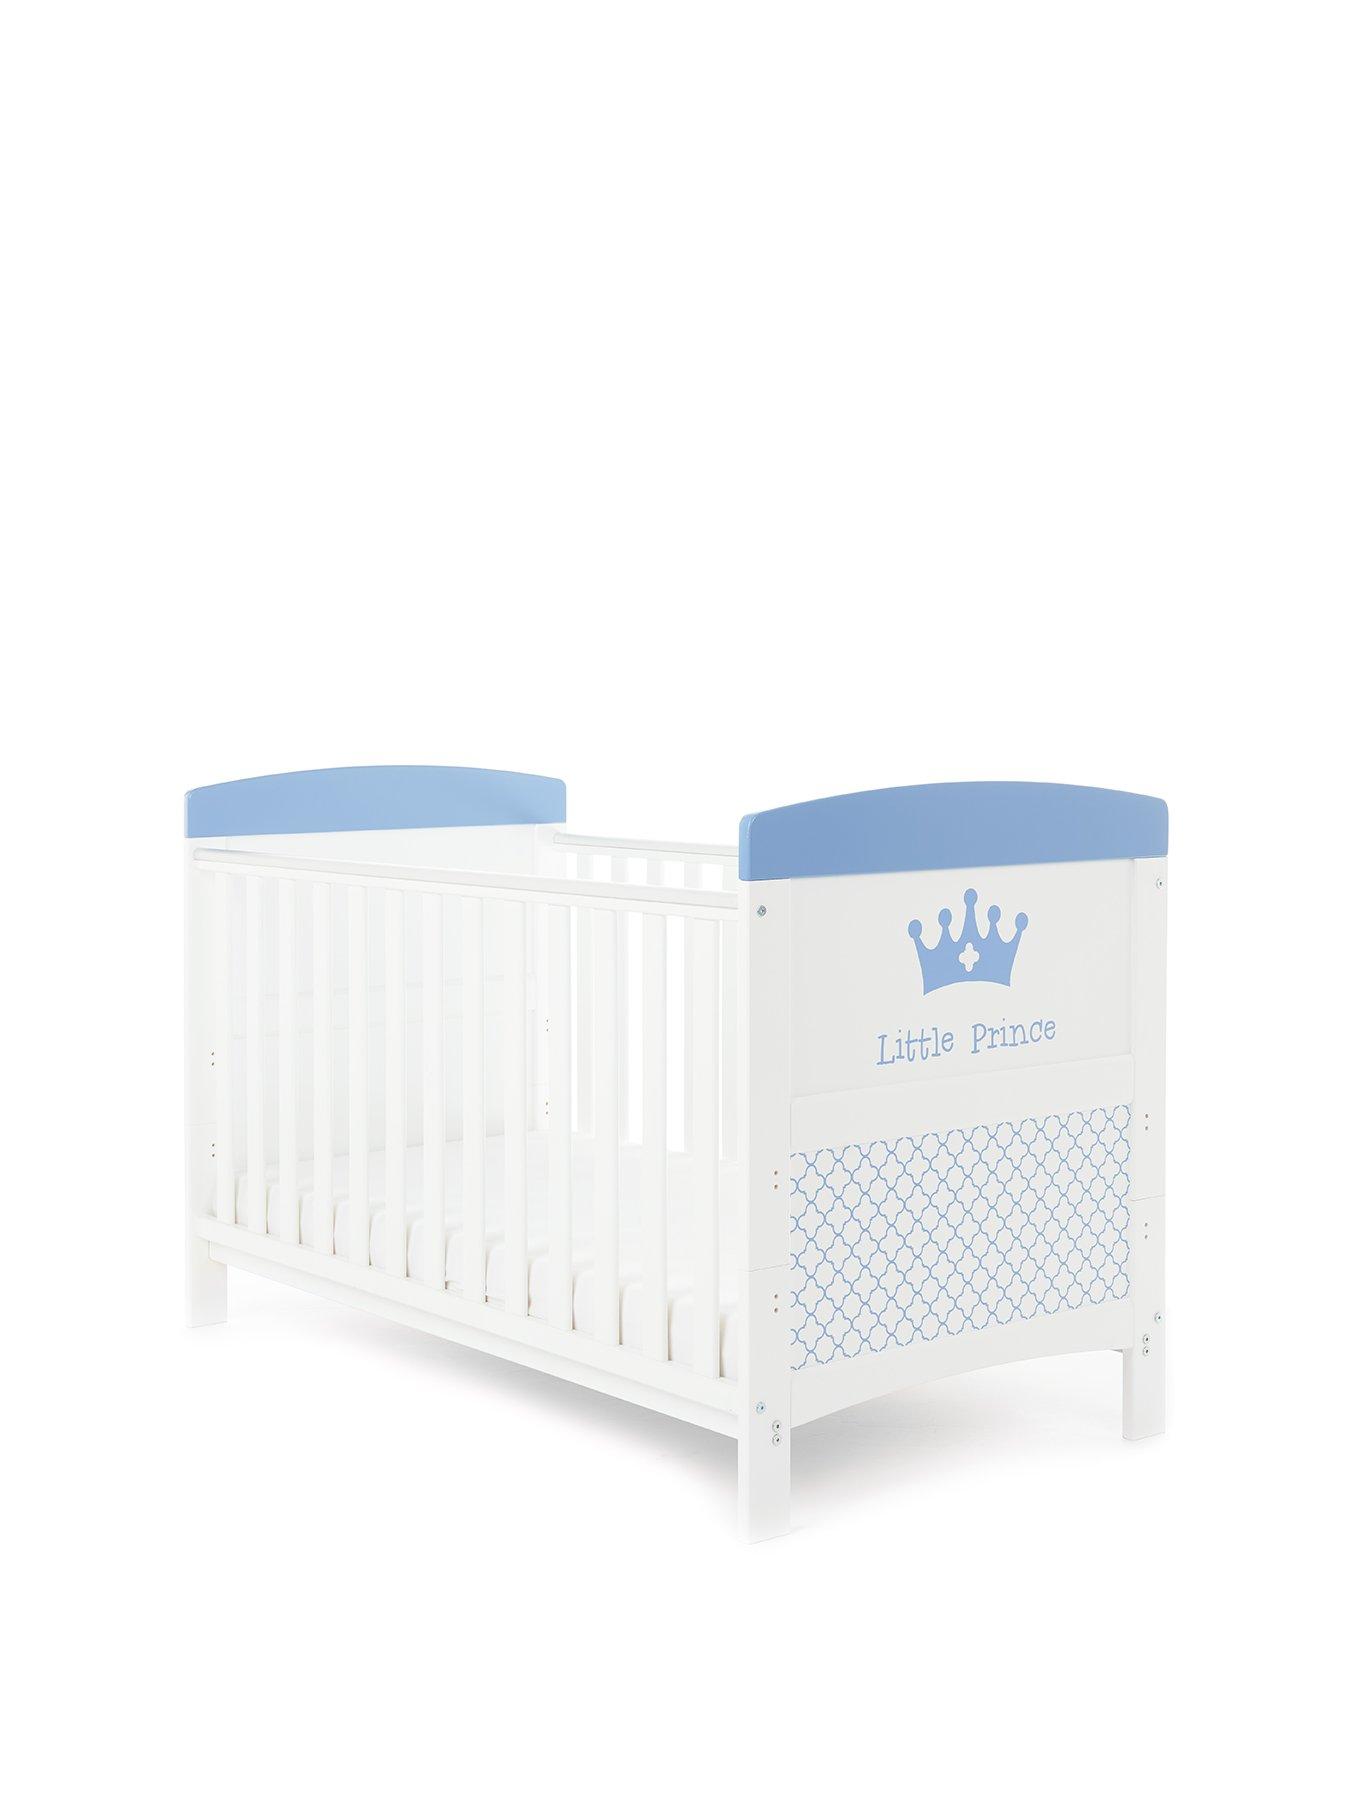 obaby cot bed grace